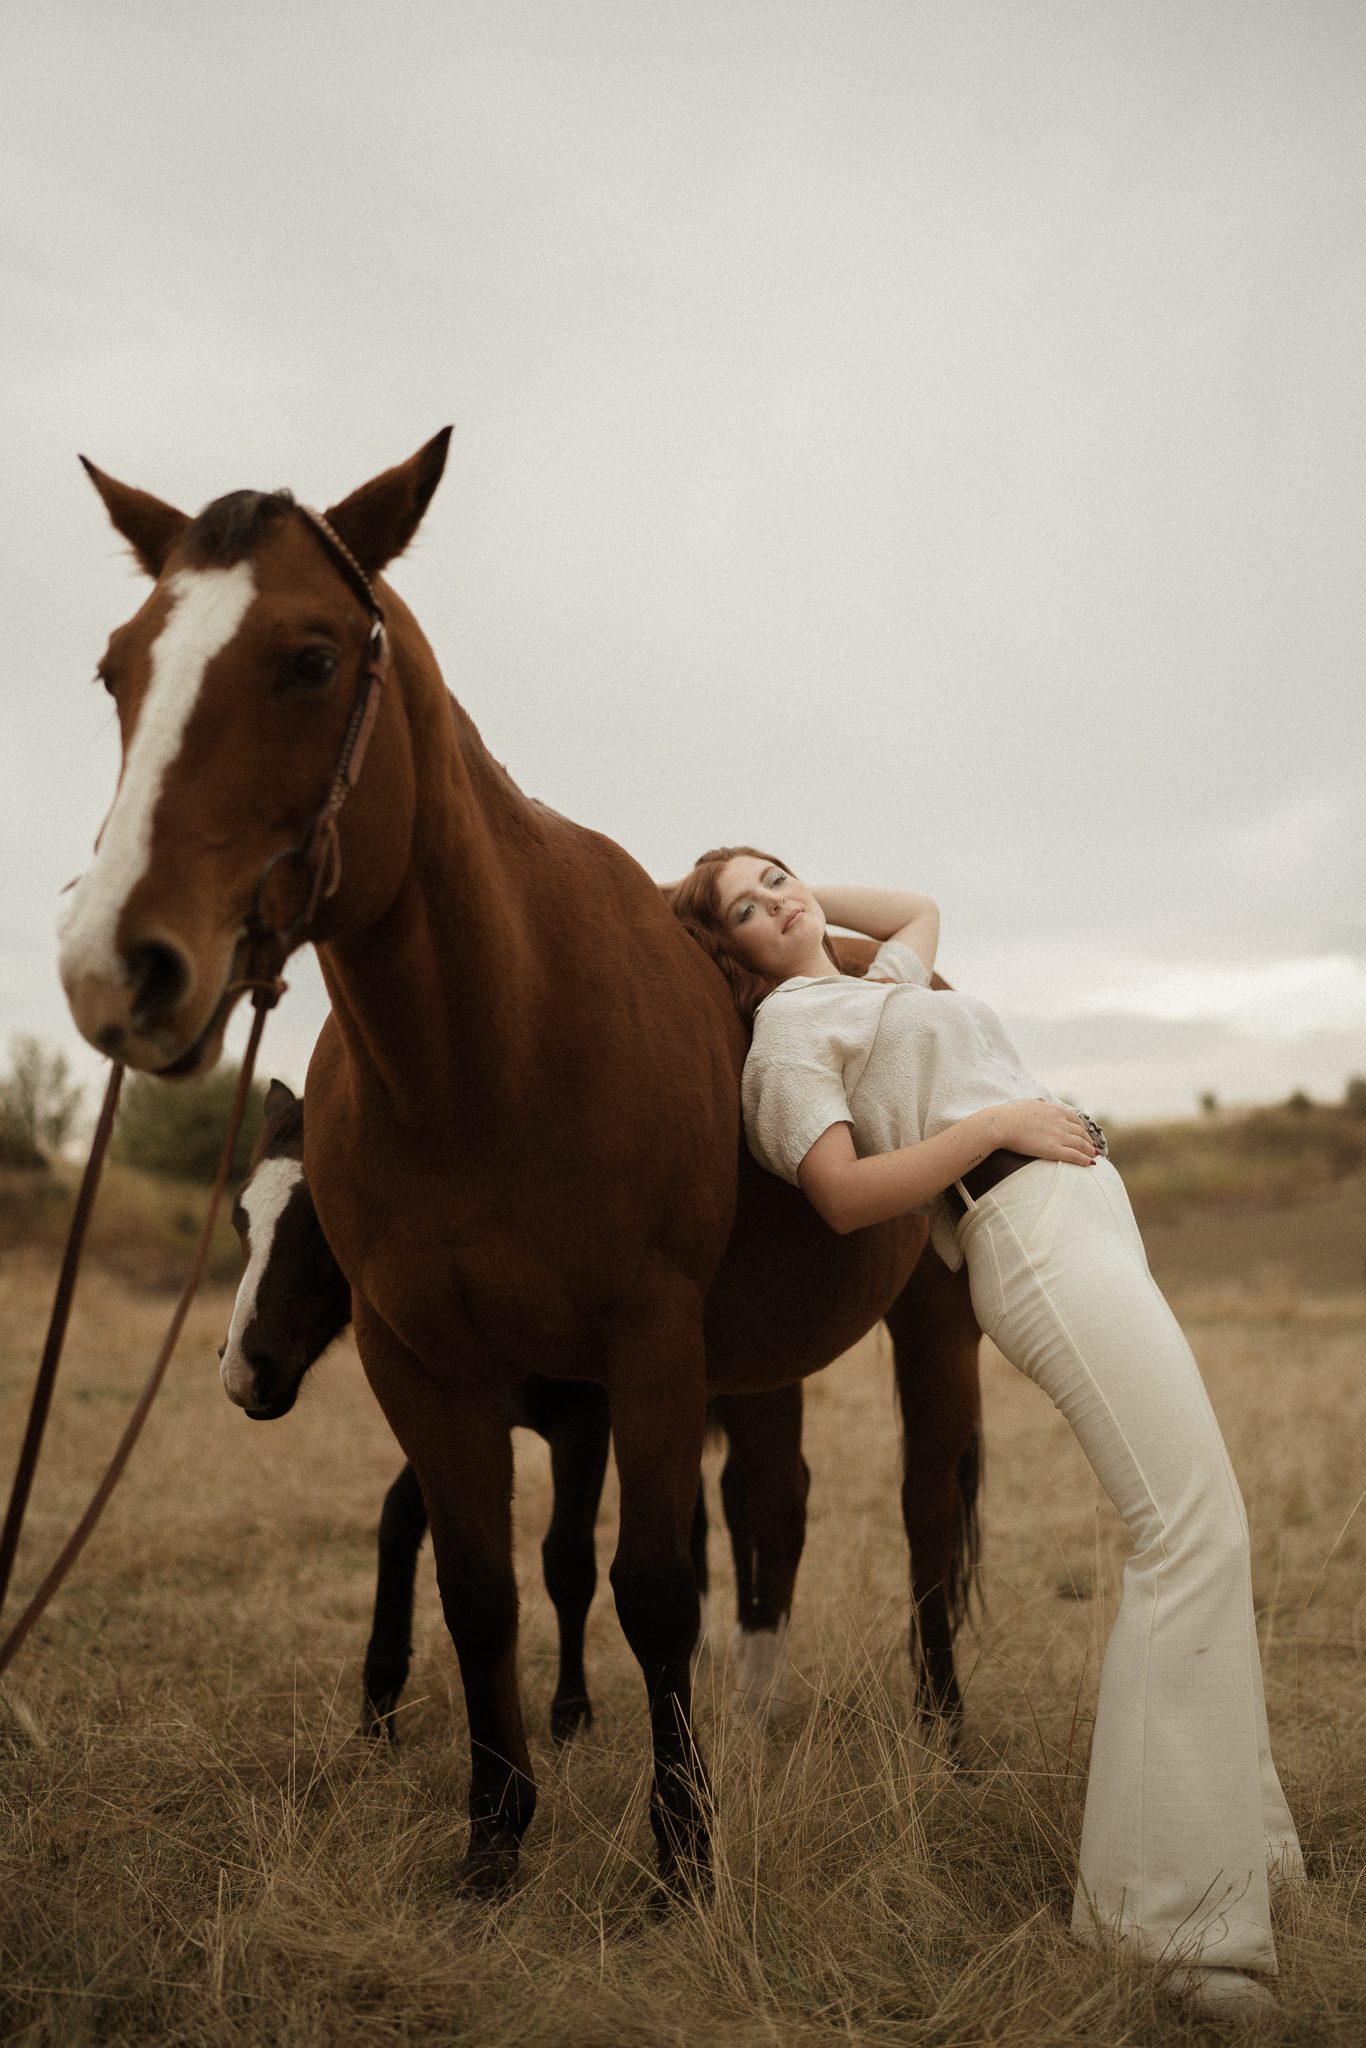 A creative portrait session with horses